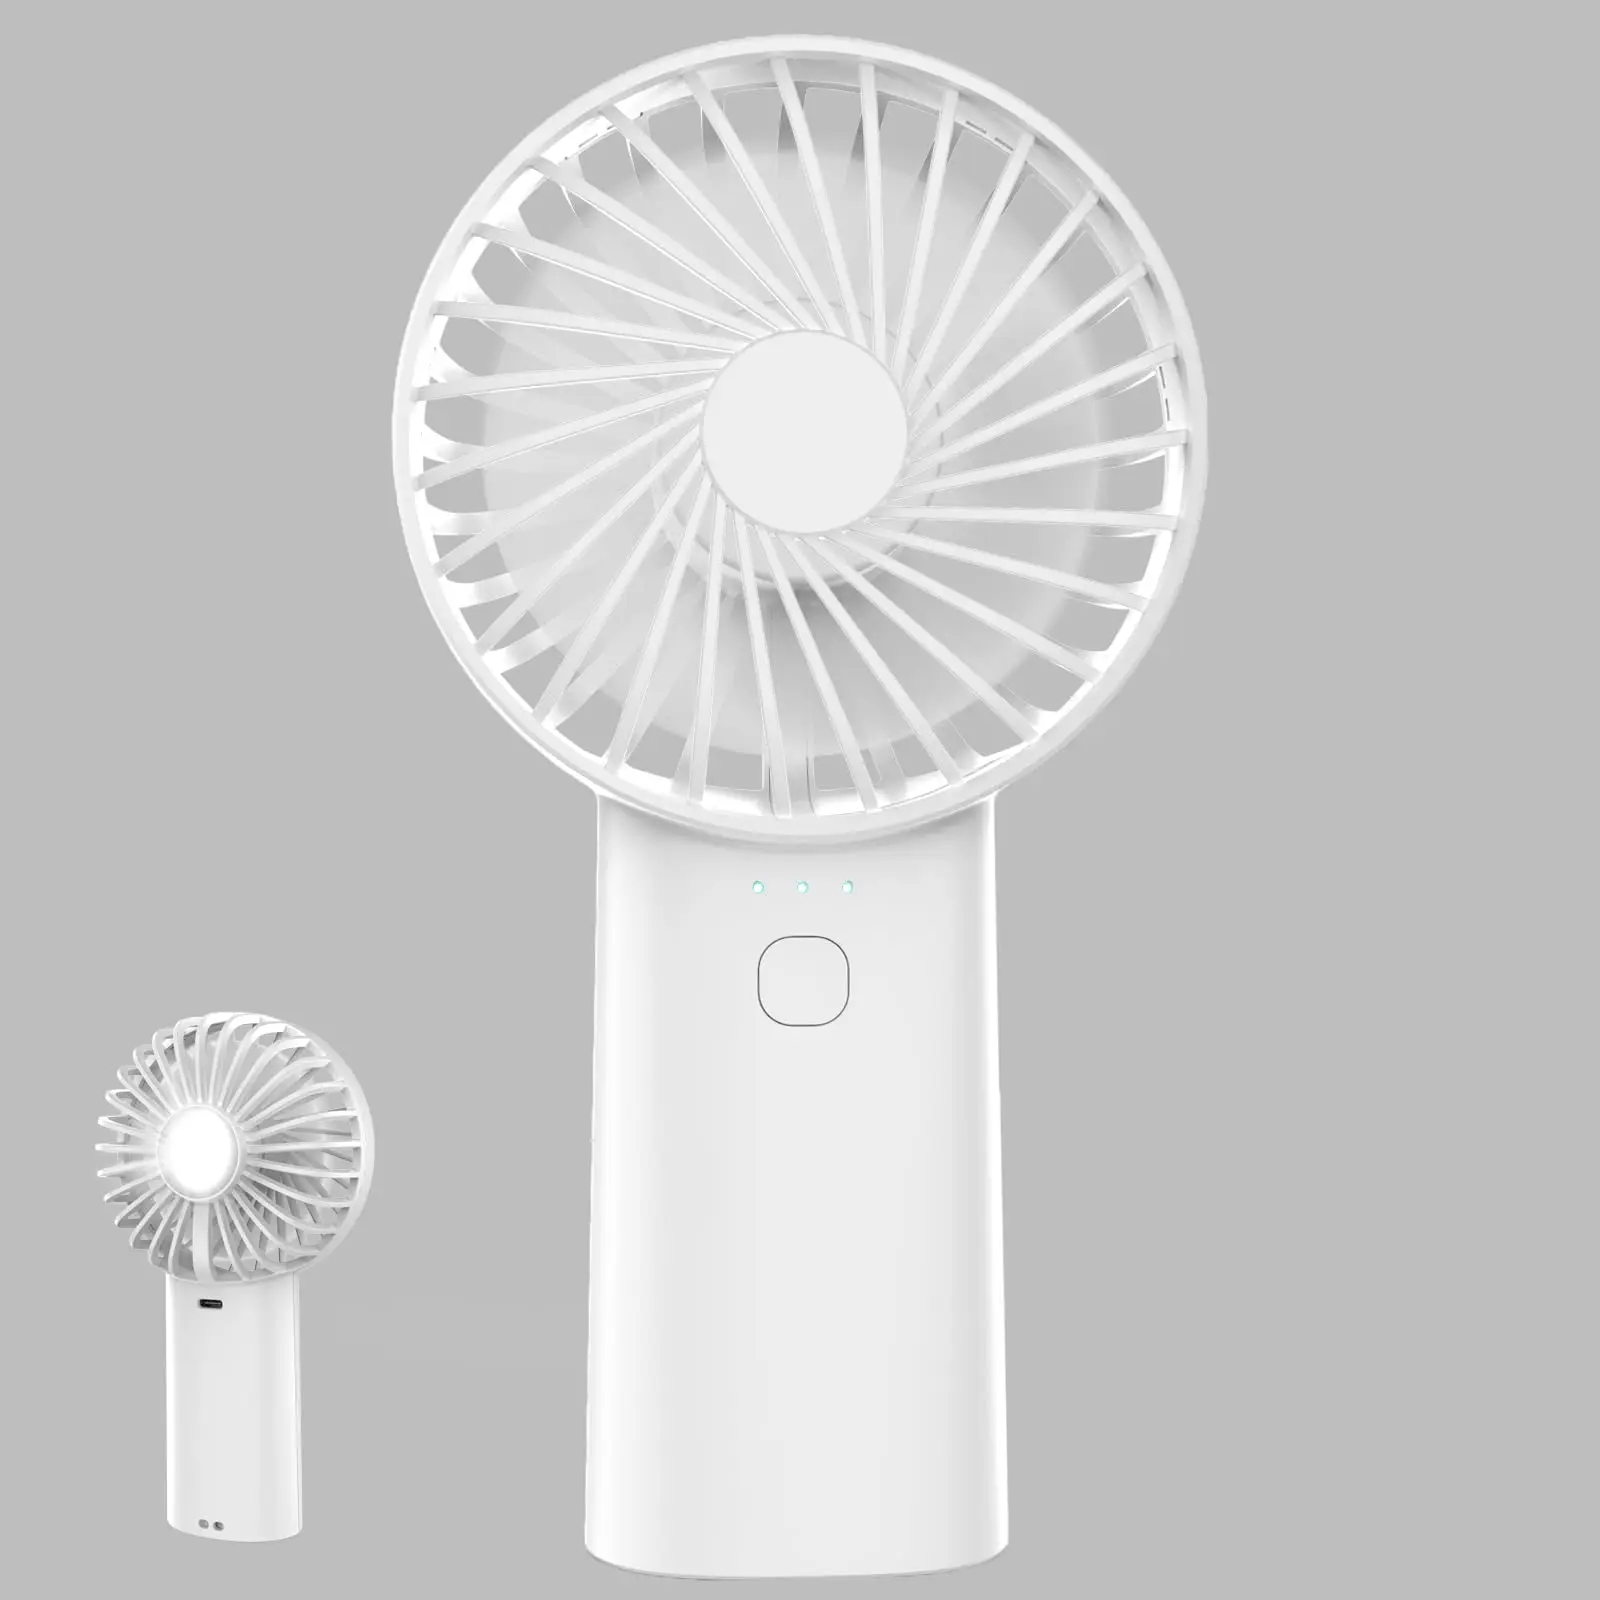 

Portable Handheld Fan 3 Speeds Powerful Personal Fans with Flashlight USB Rechargeable 2400mAh Battery Operated for 3-15 hours